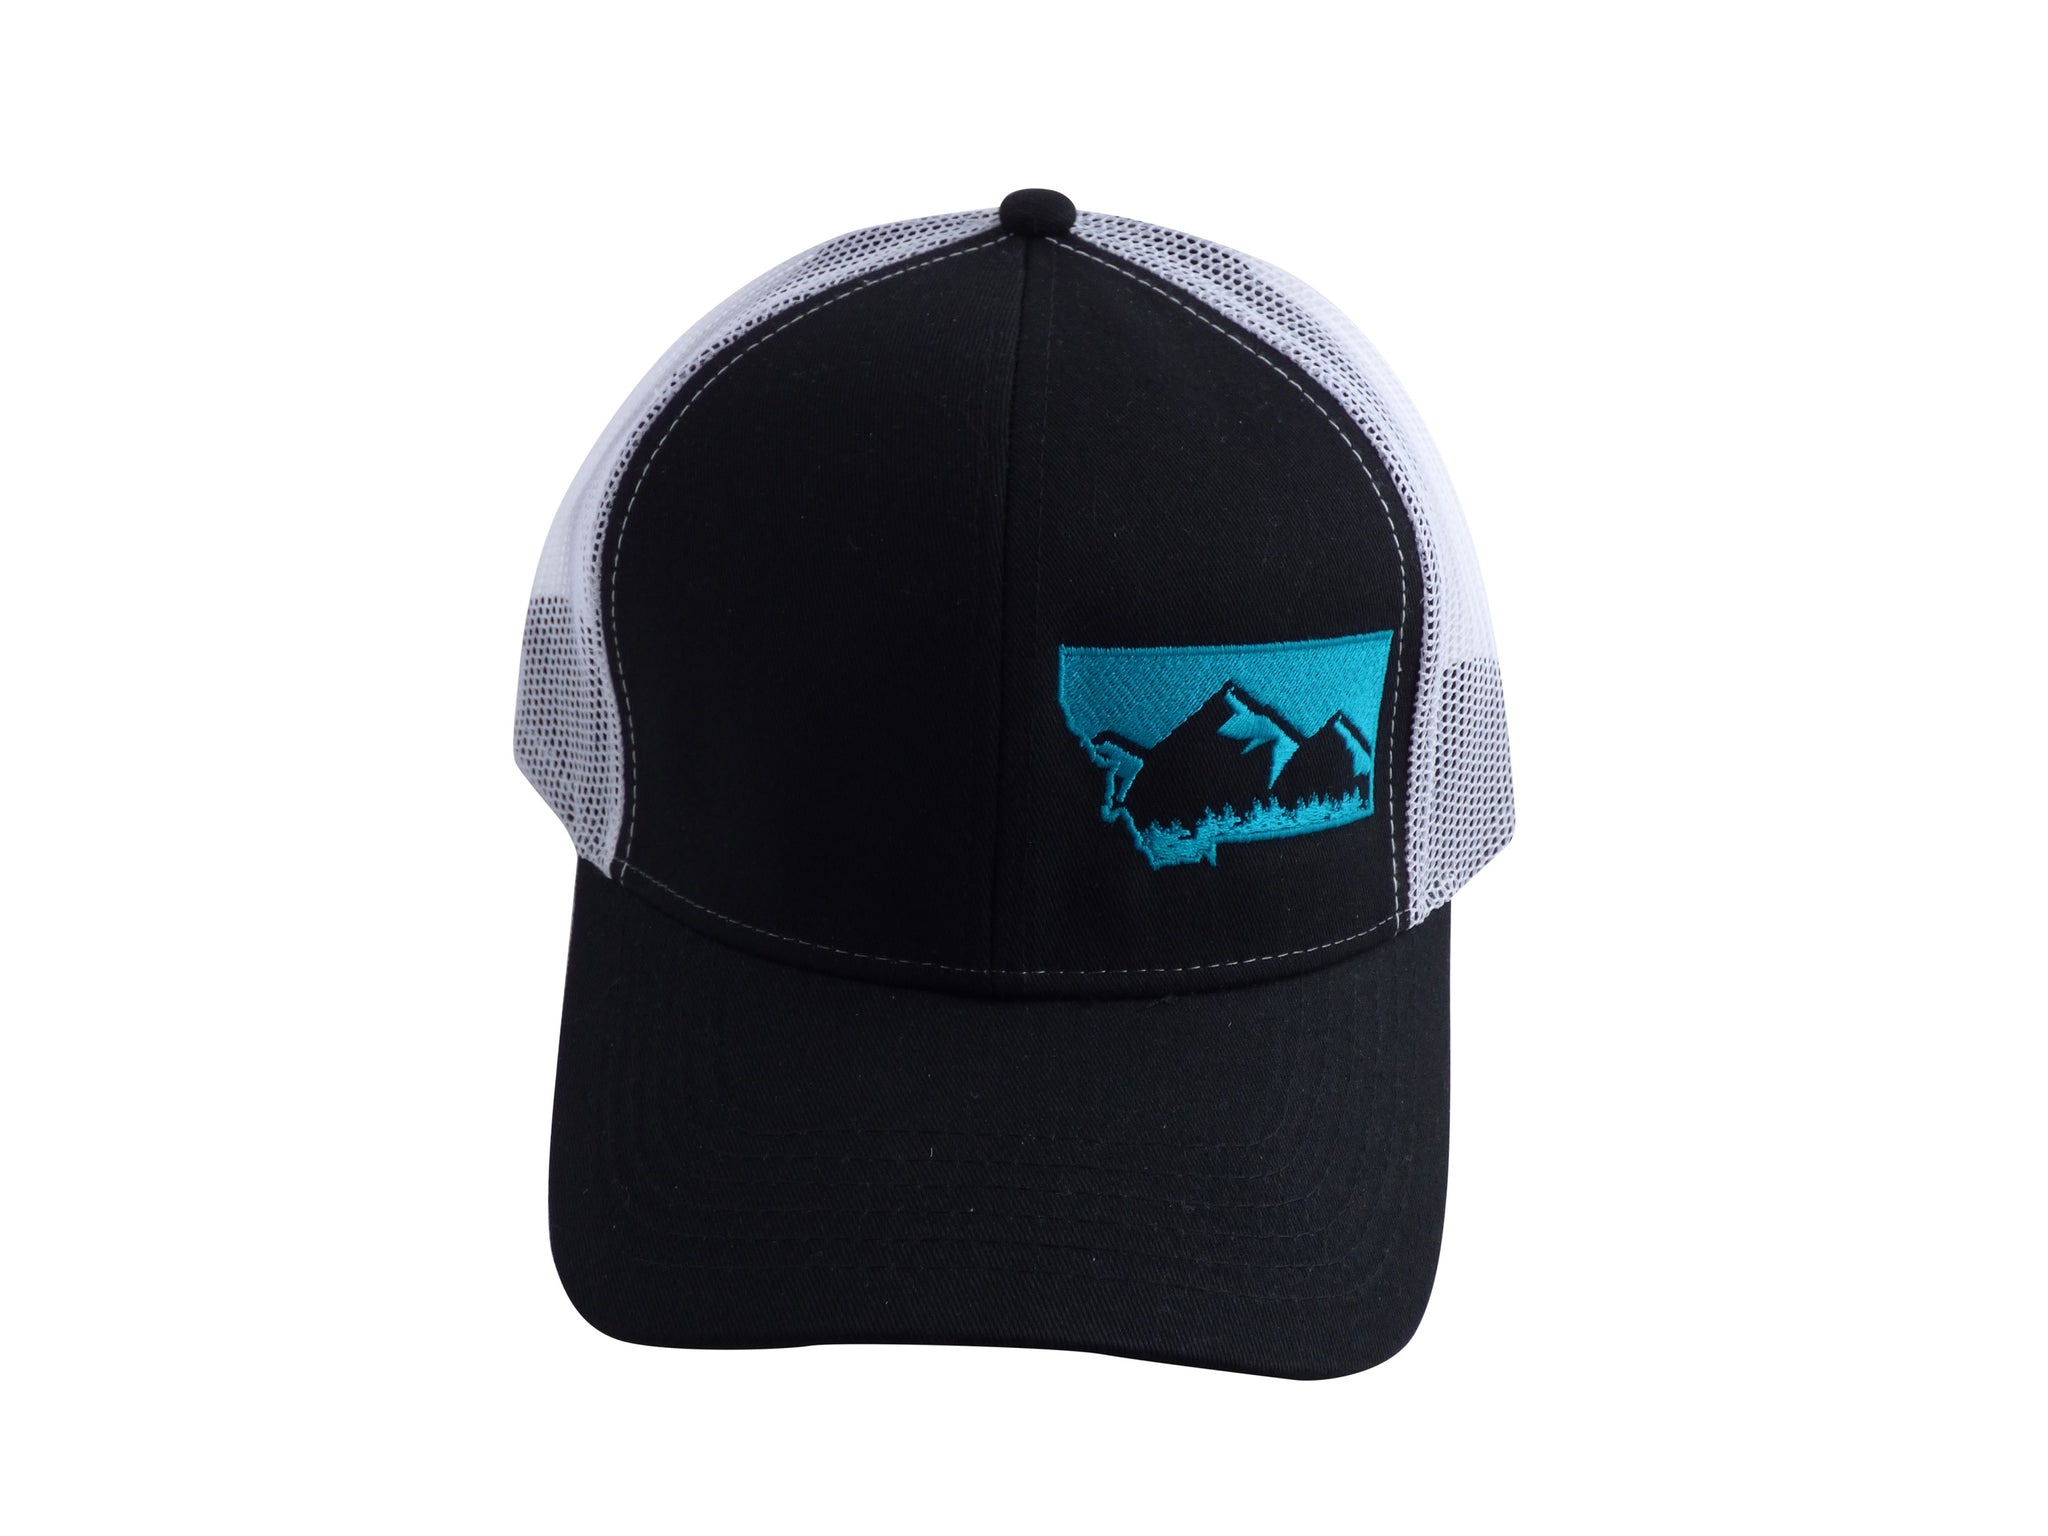 Black with Teal MT Hat